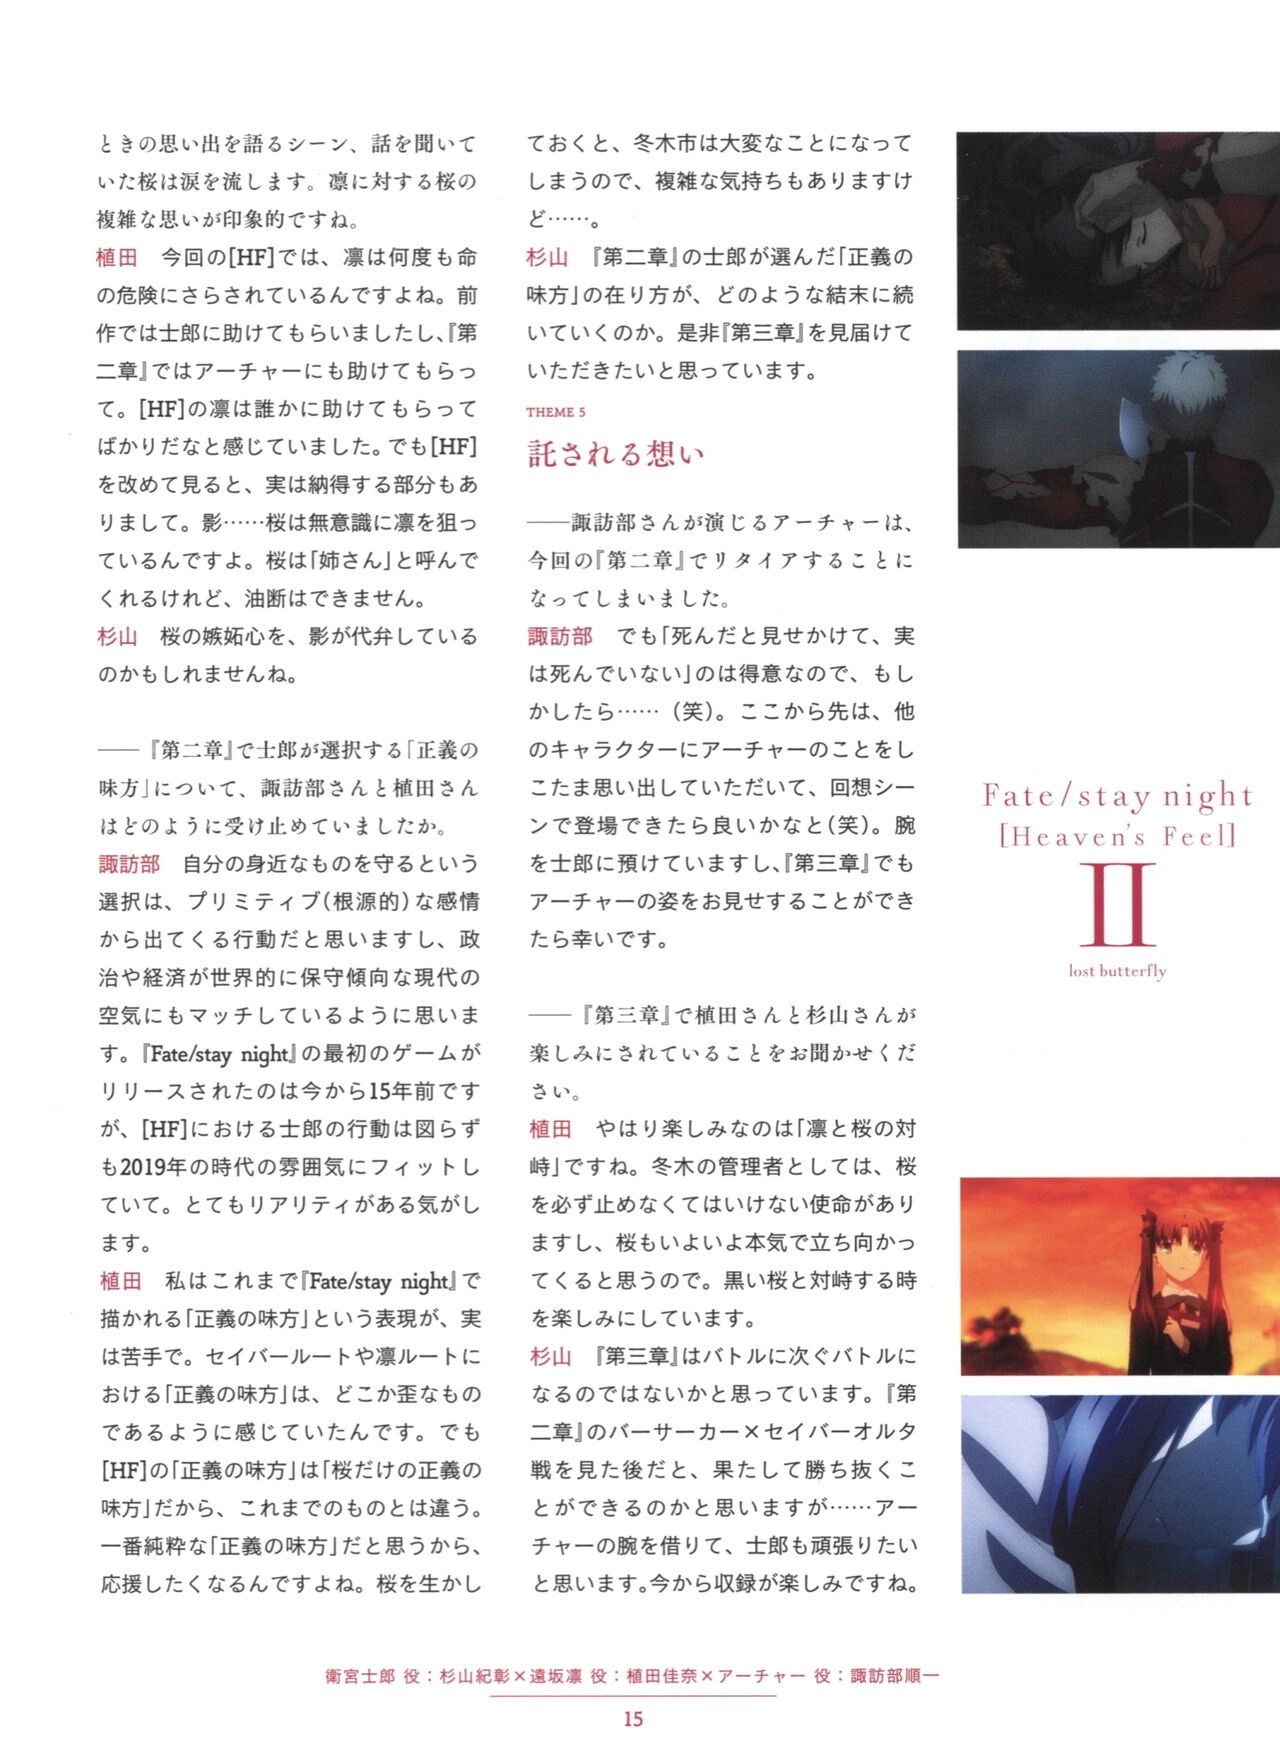 Fate/Stay Night: Heaven's Feel II - Lost Butterfly Animation Material 14